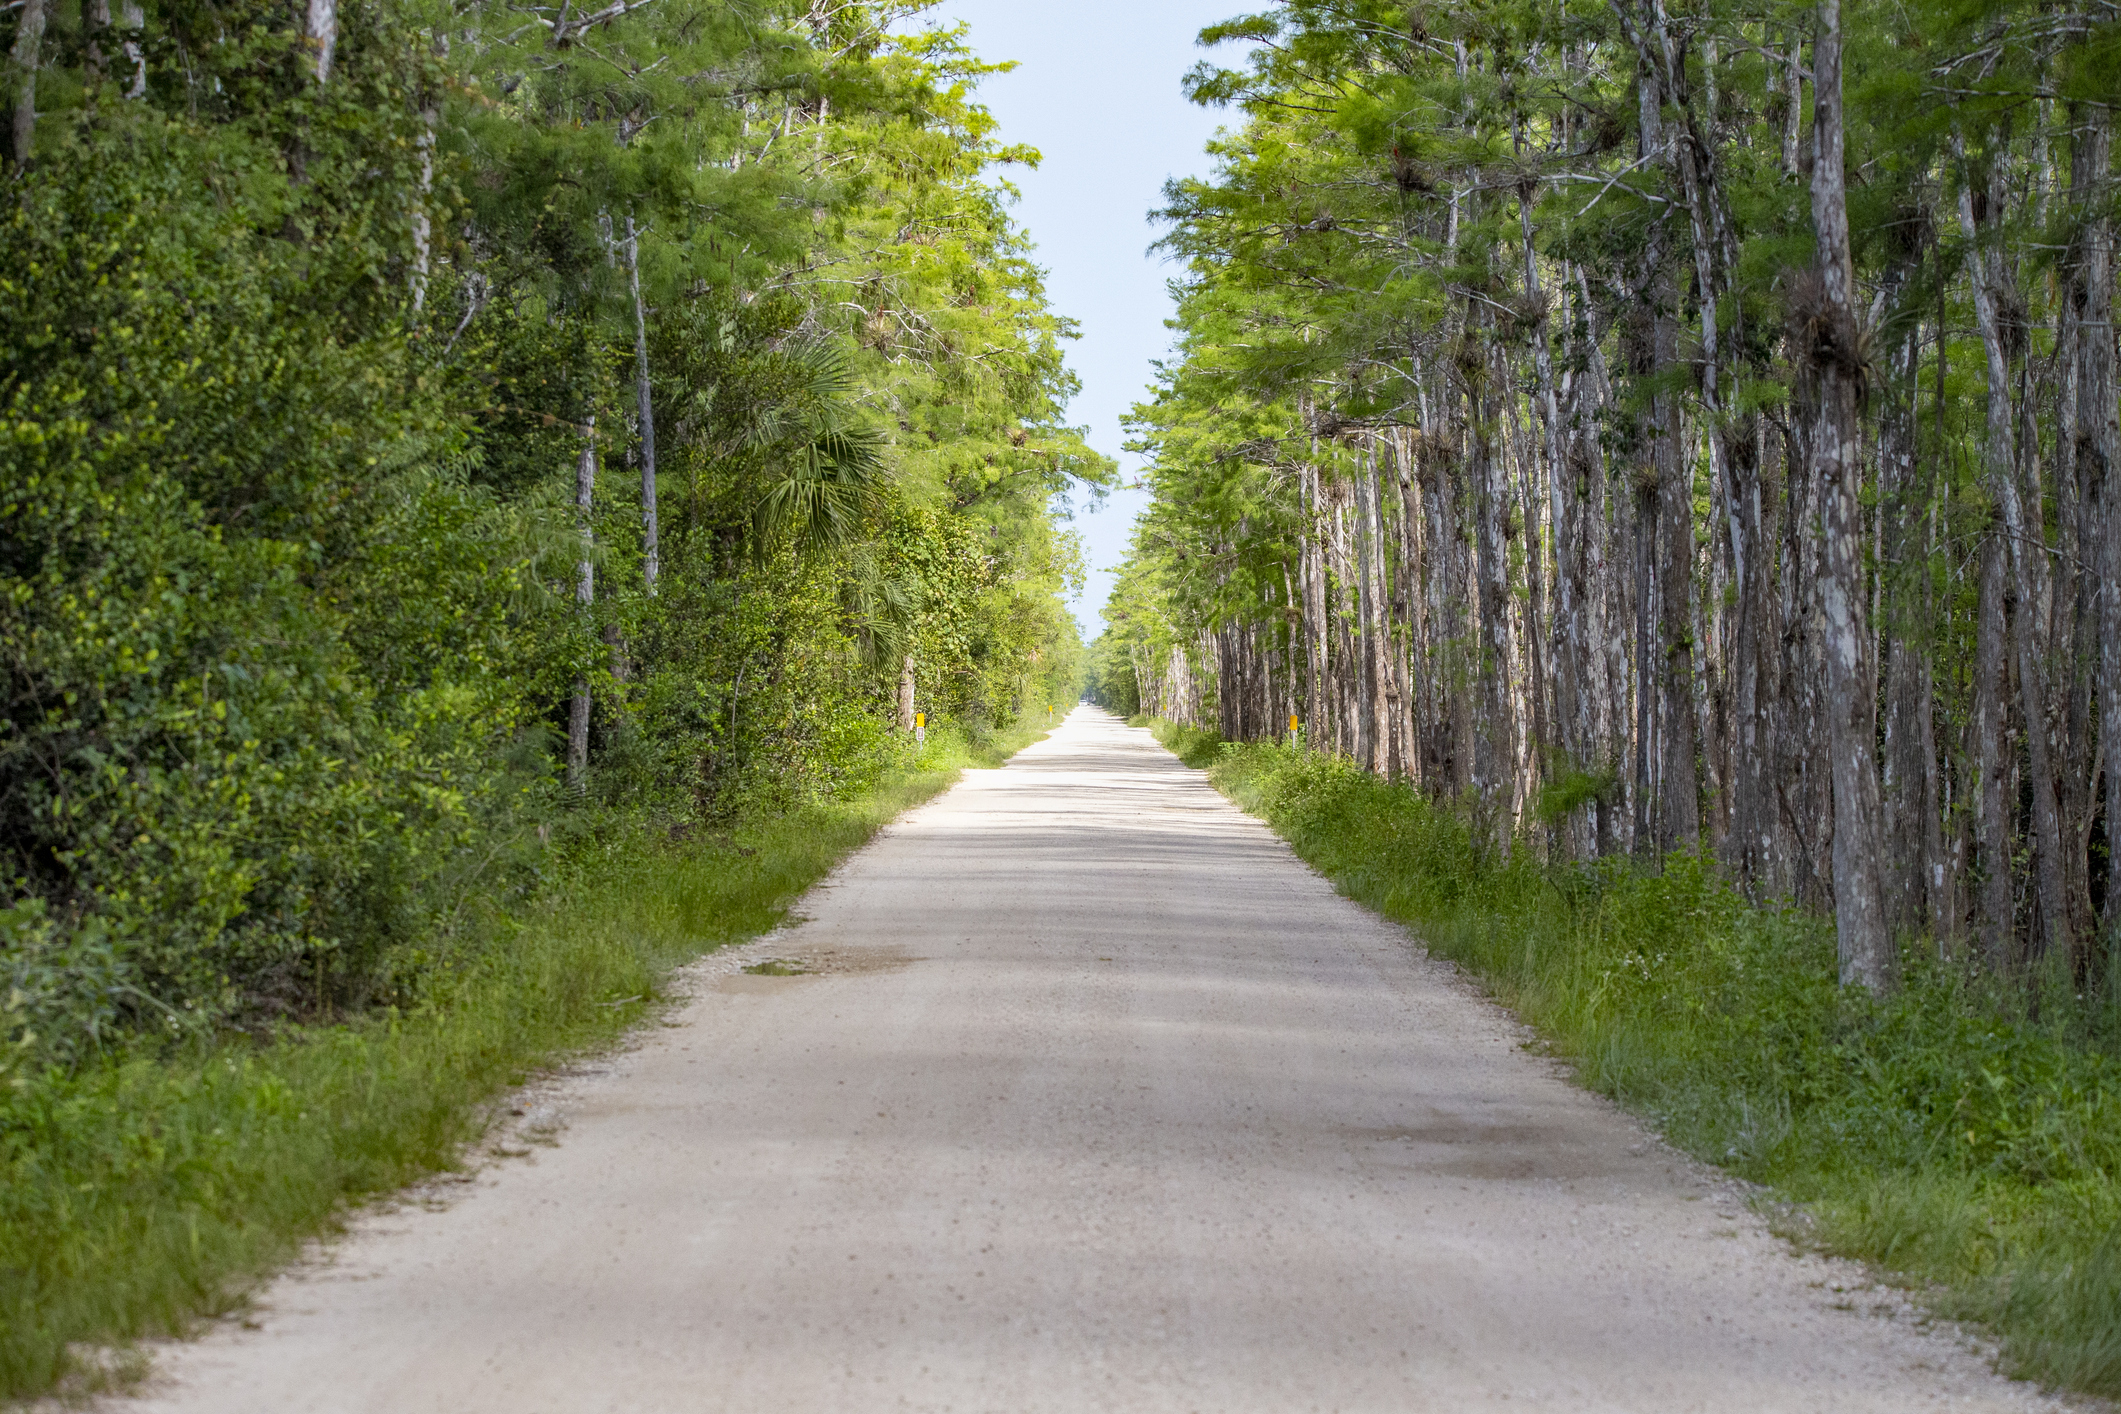 A dirt road flanked by tall trees leading into the distance